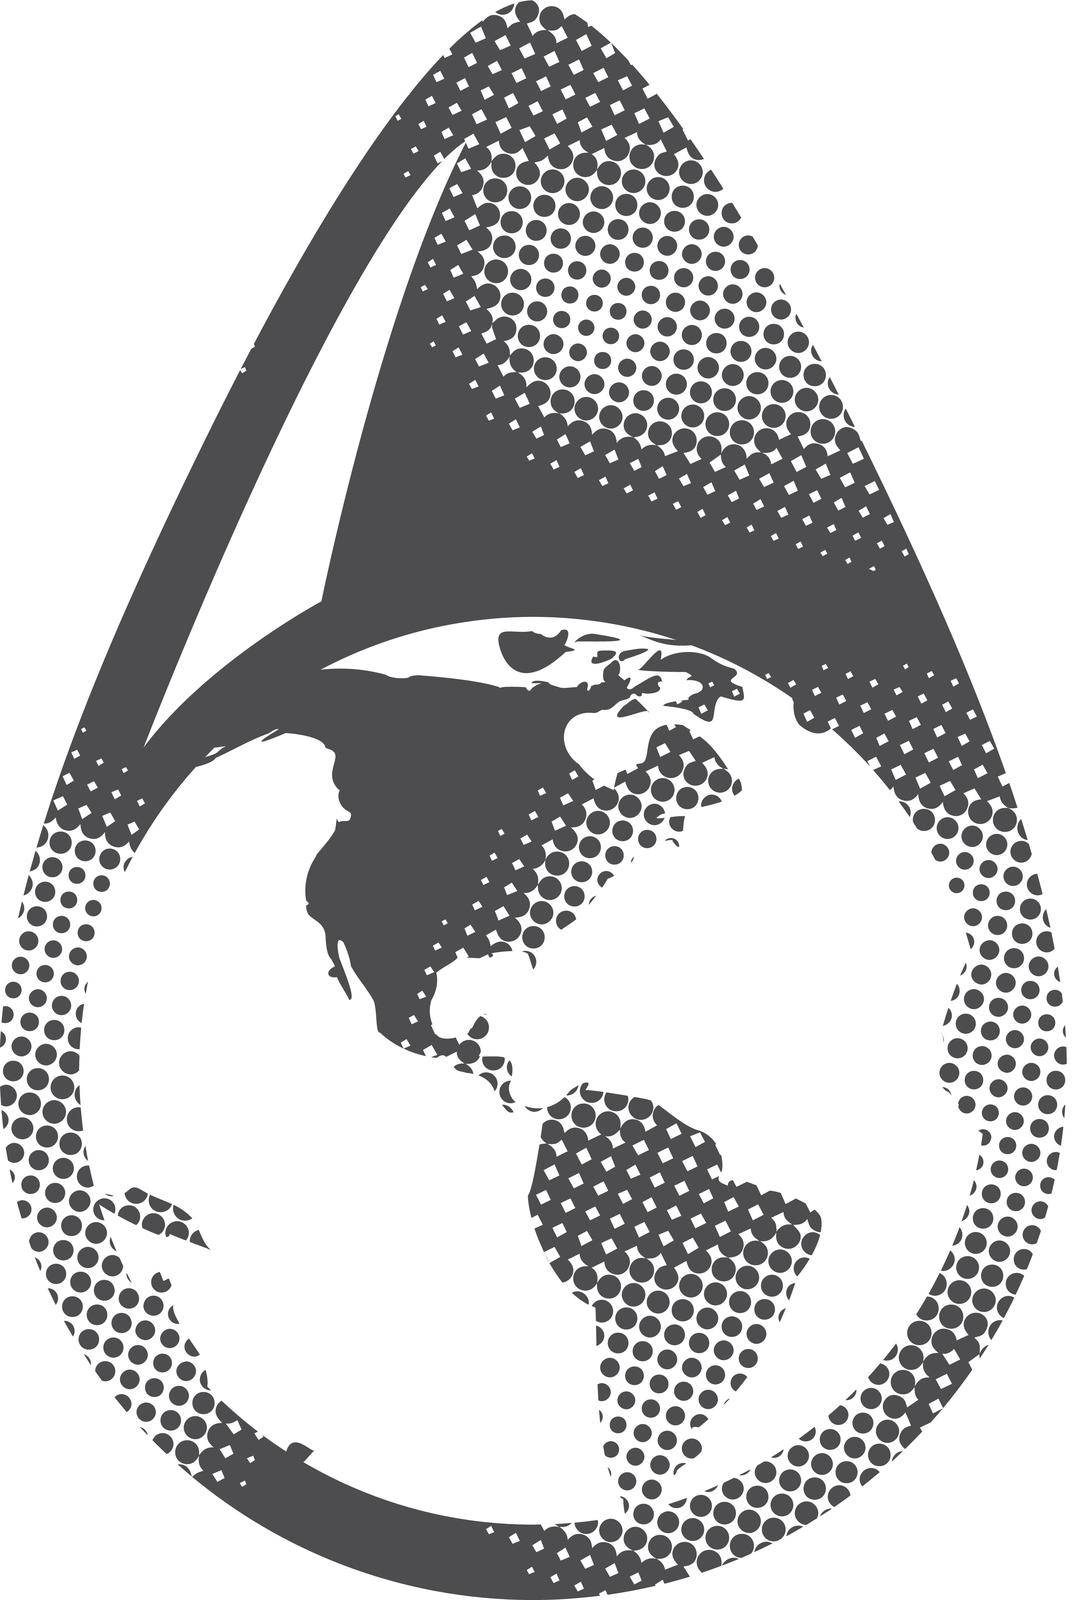 Earth water drop icon in halftone style. Black and white monochrome vector illustration.